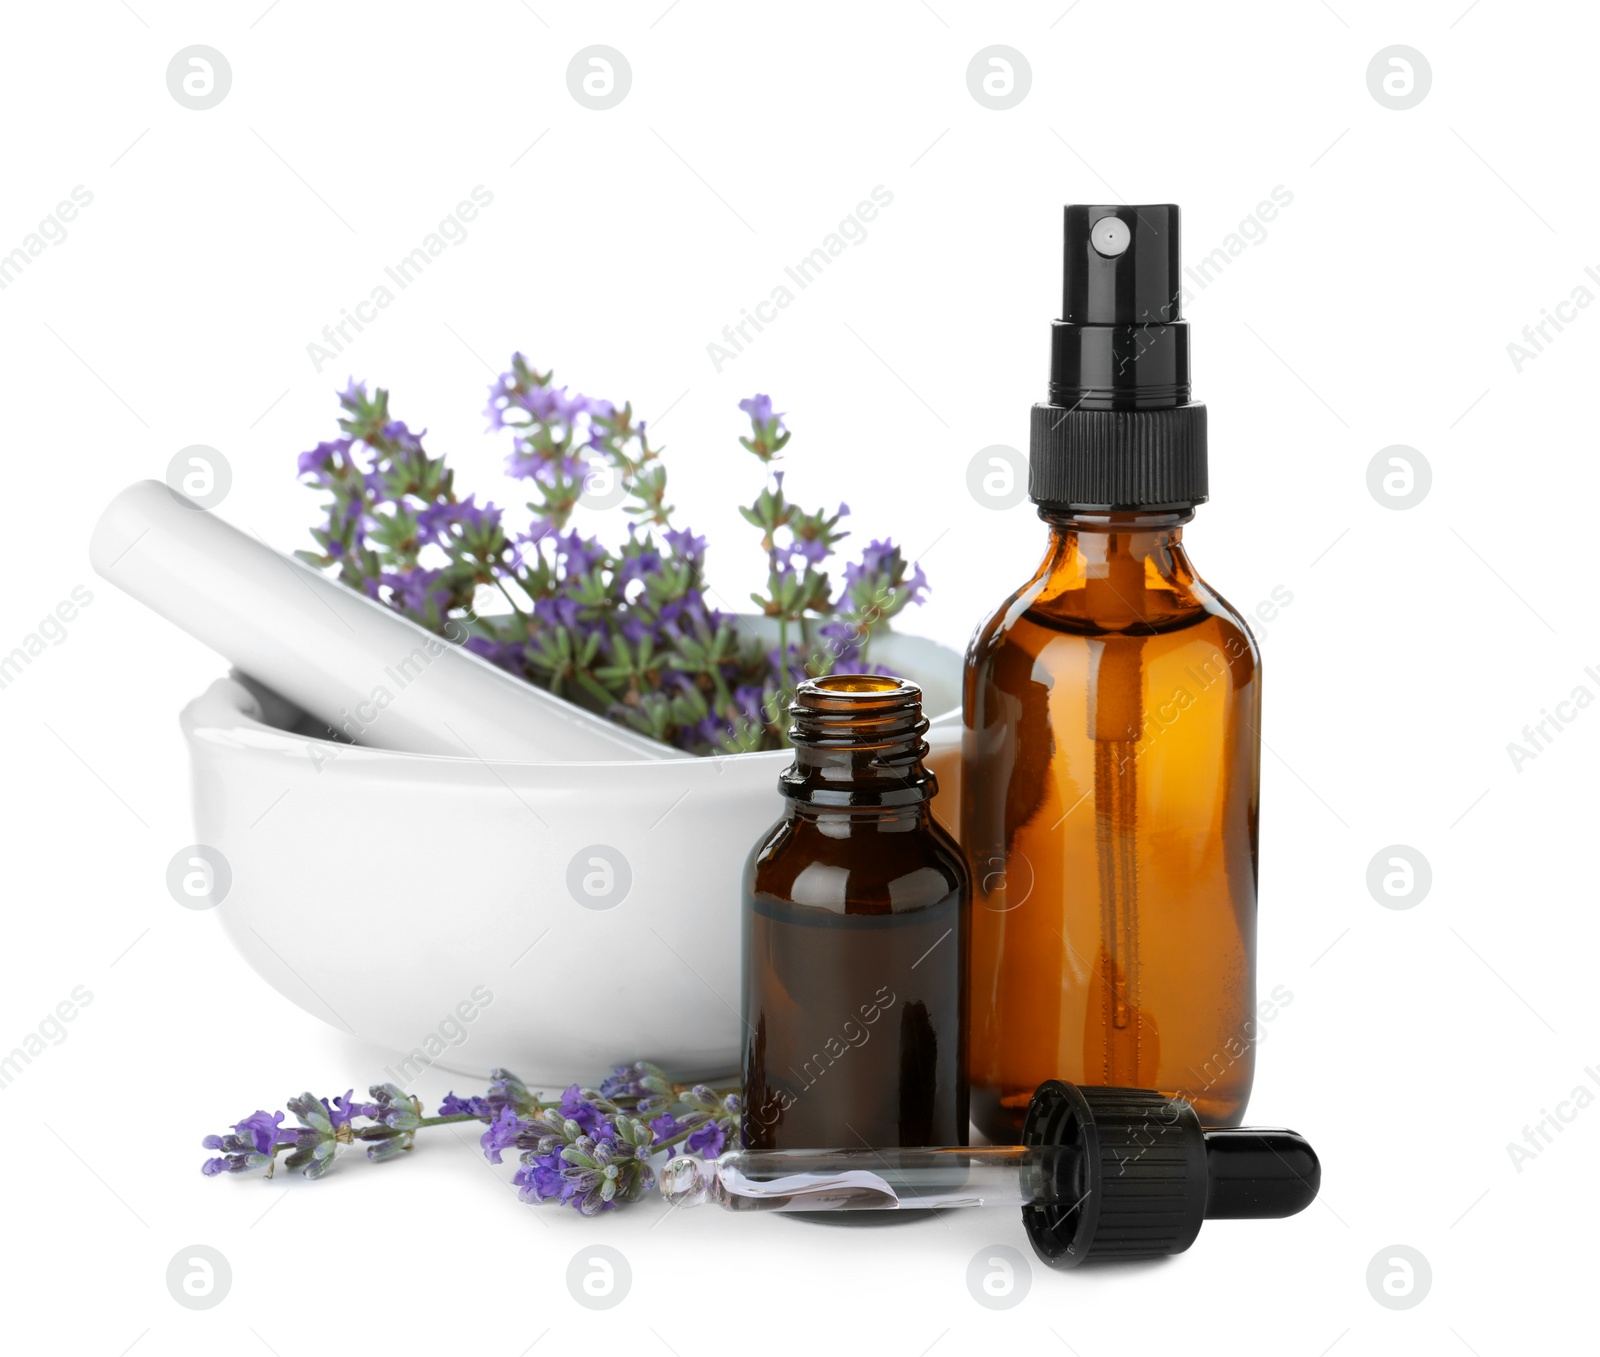 Photo of Bottles of essential oil, mortar and pestle with lavender flowers isolated on white